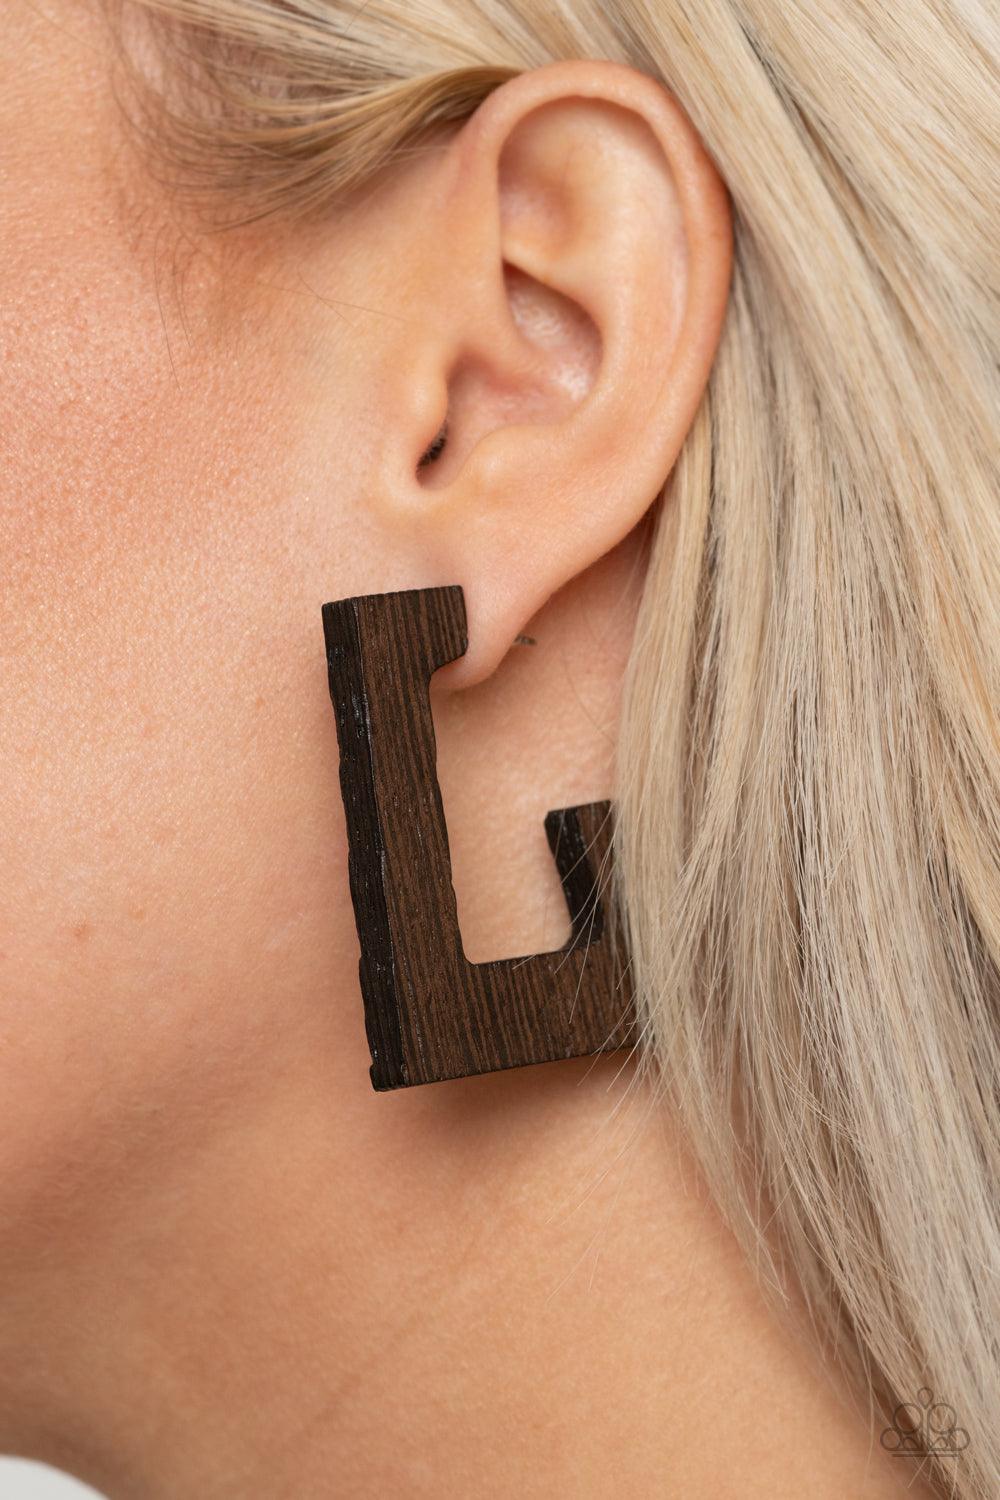 Paparazzi Accessories The Girl Next OUTDOOR - Brown Brushed in a neutral brown finish, a distressed wooden frame curves around the ear, creating a rectangular hoop for a retro effect. Earring attaches to a standard post fitting. Hoop measures approximatel